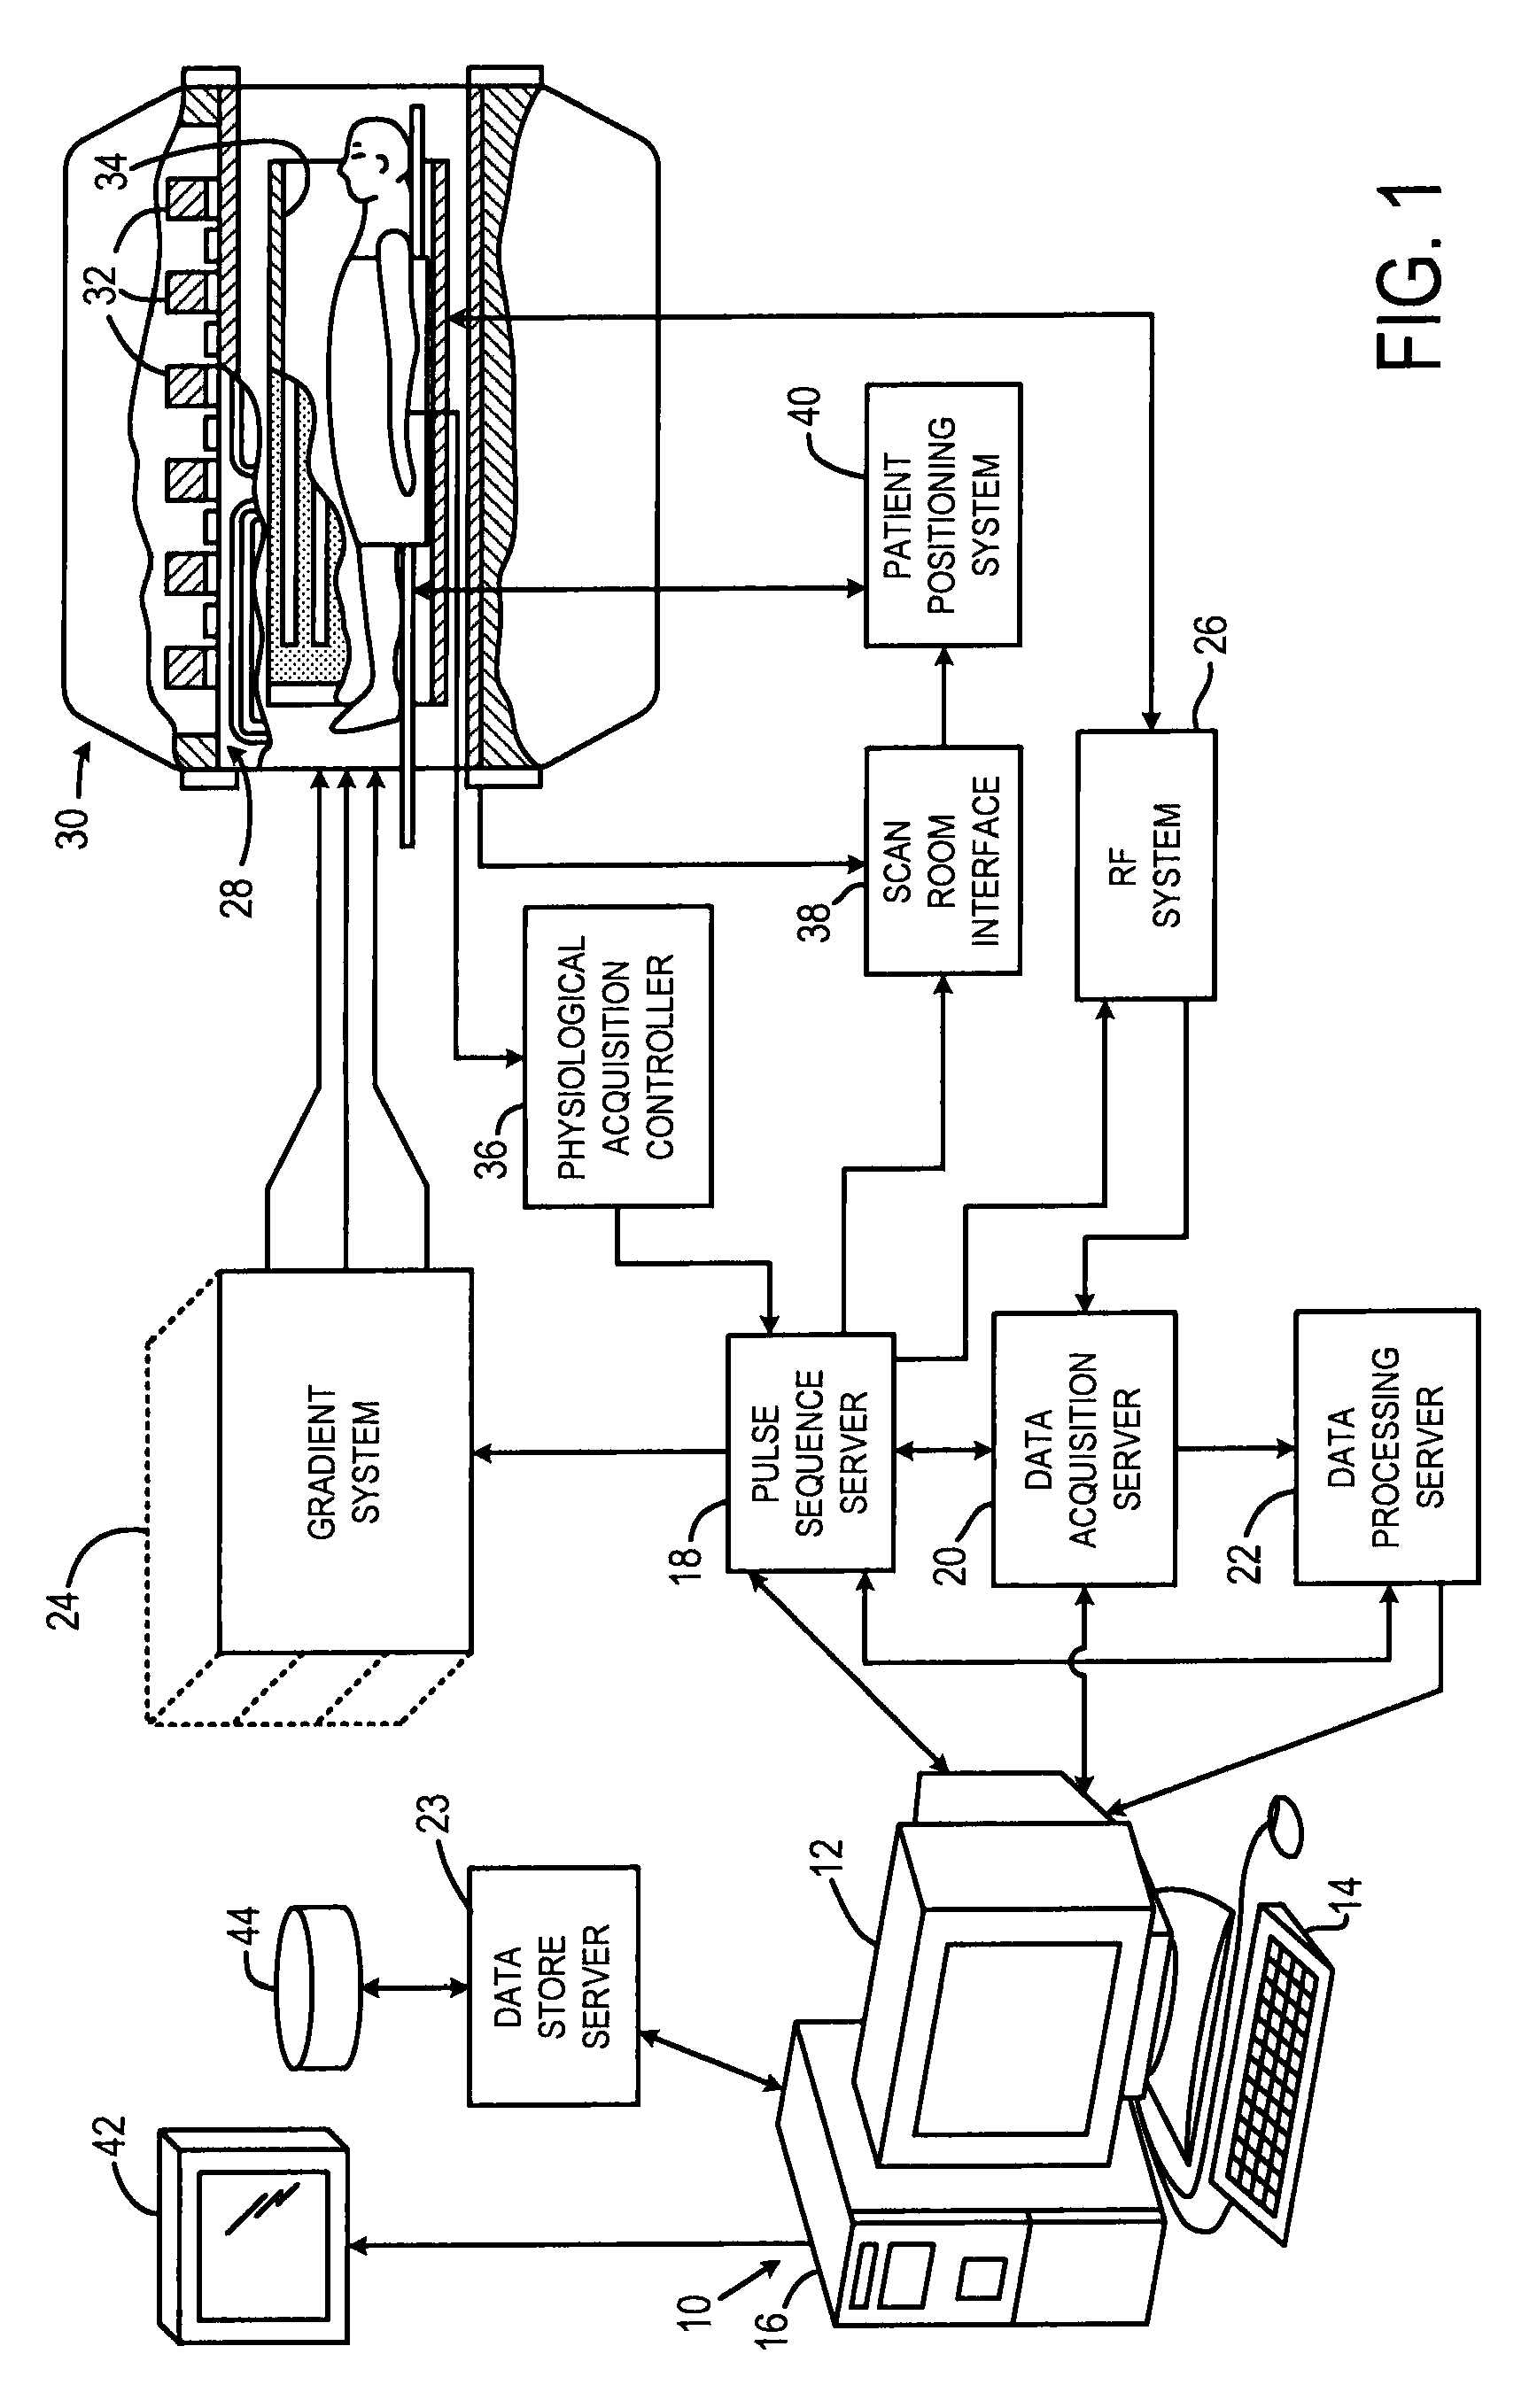 System and method for variable mode-mixing in magnetic resonance imaging